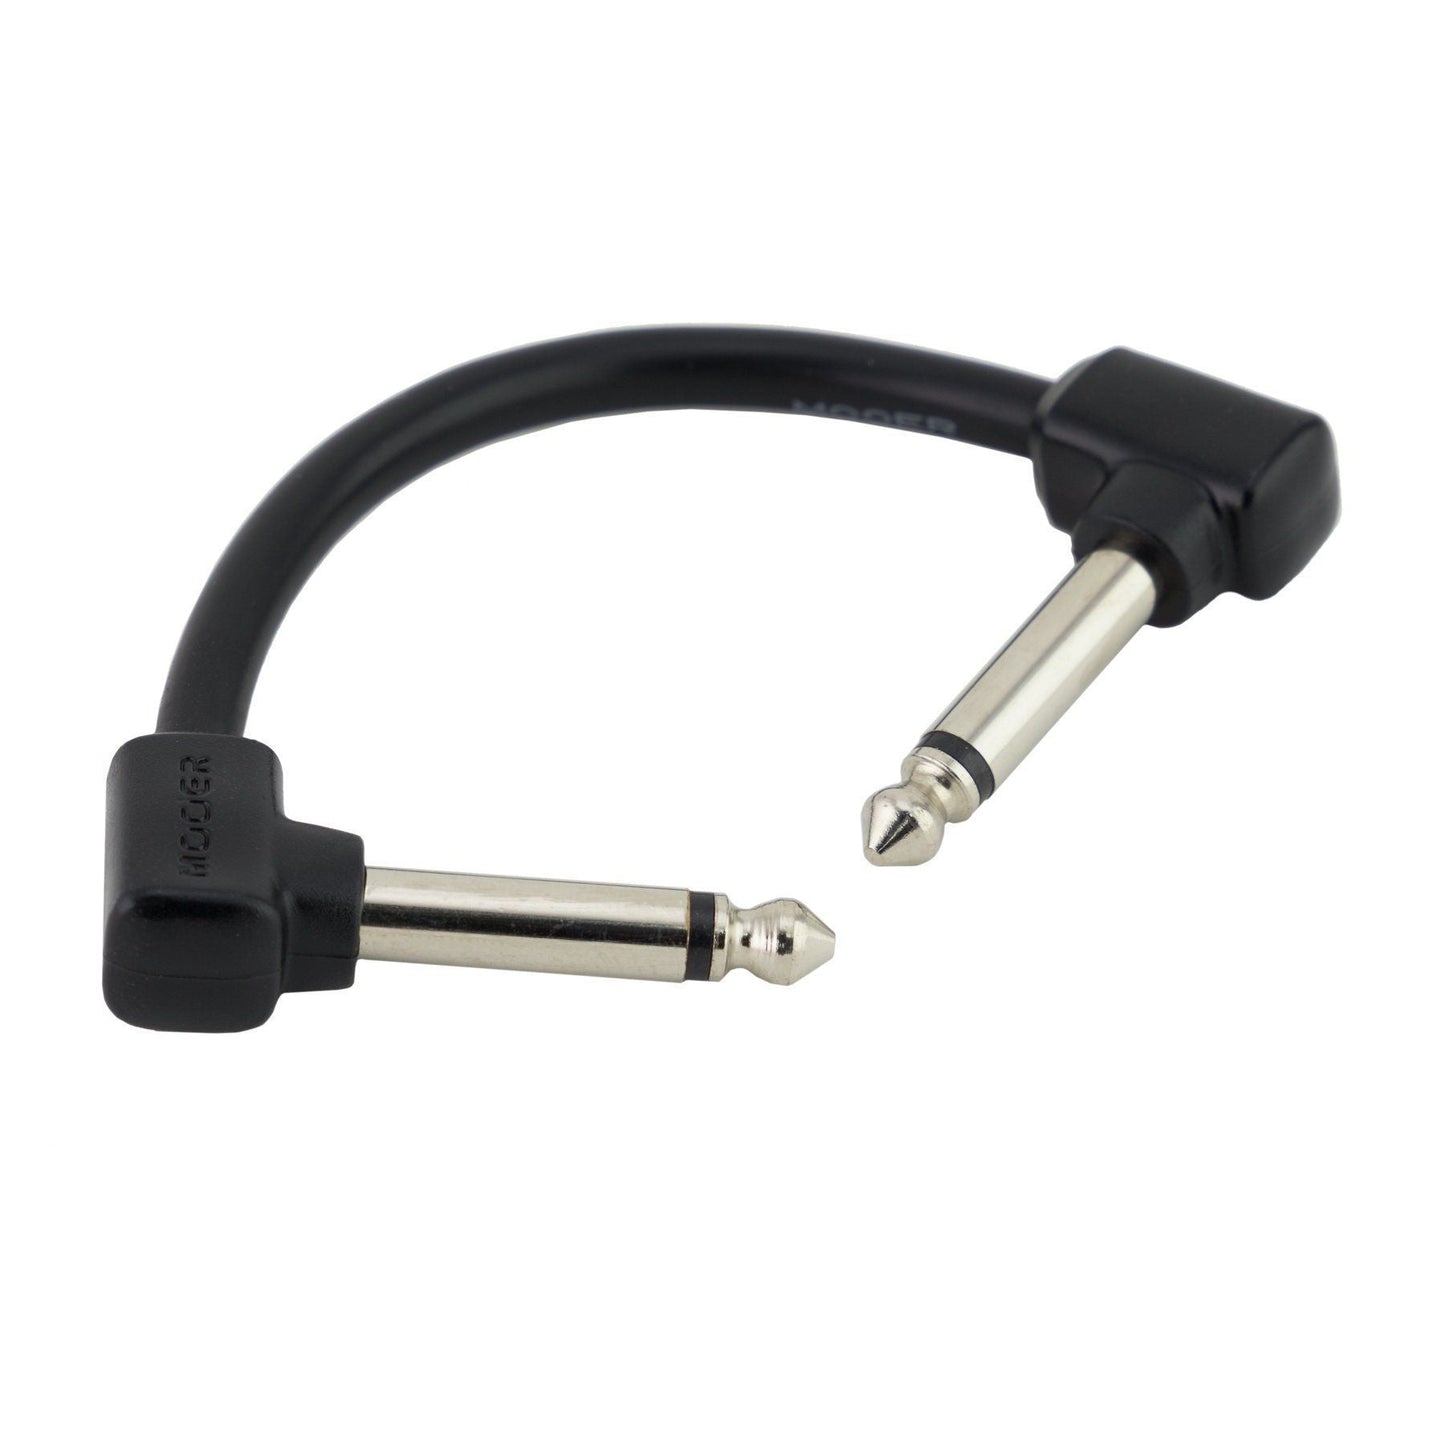 Mooer 4" Moulded Patch Cable